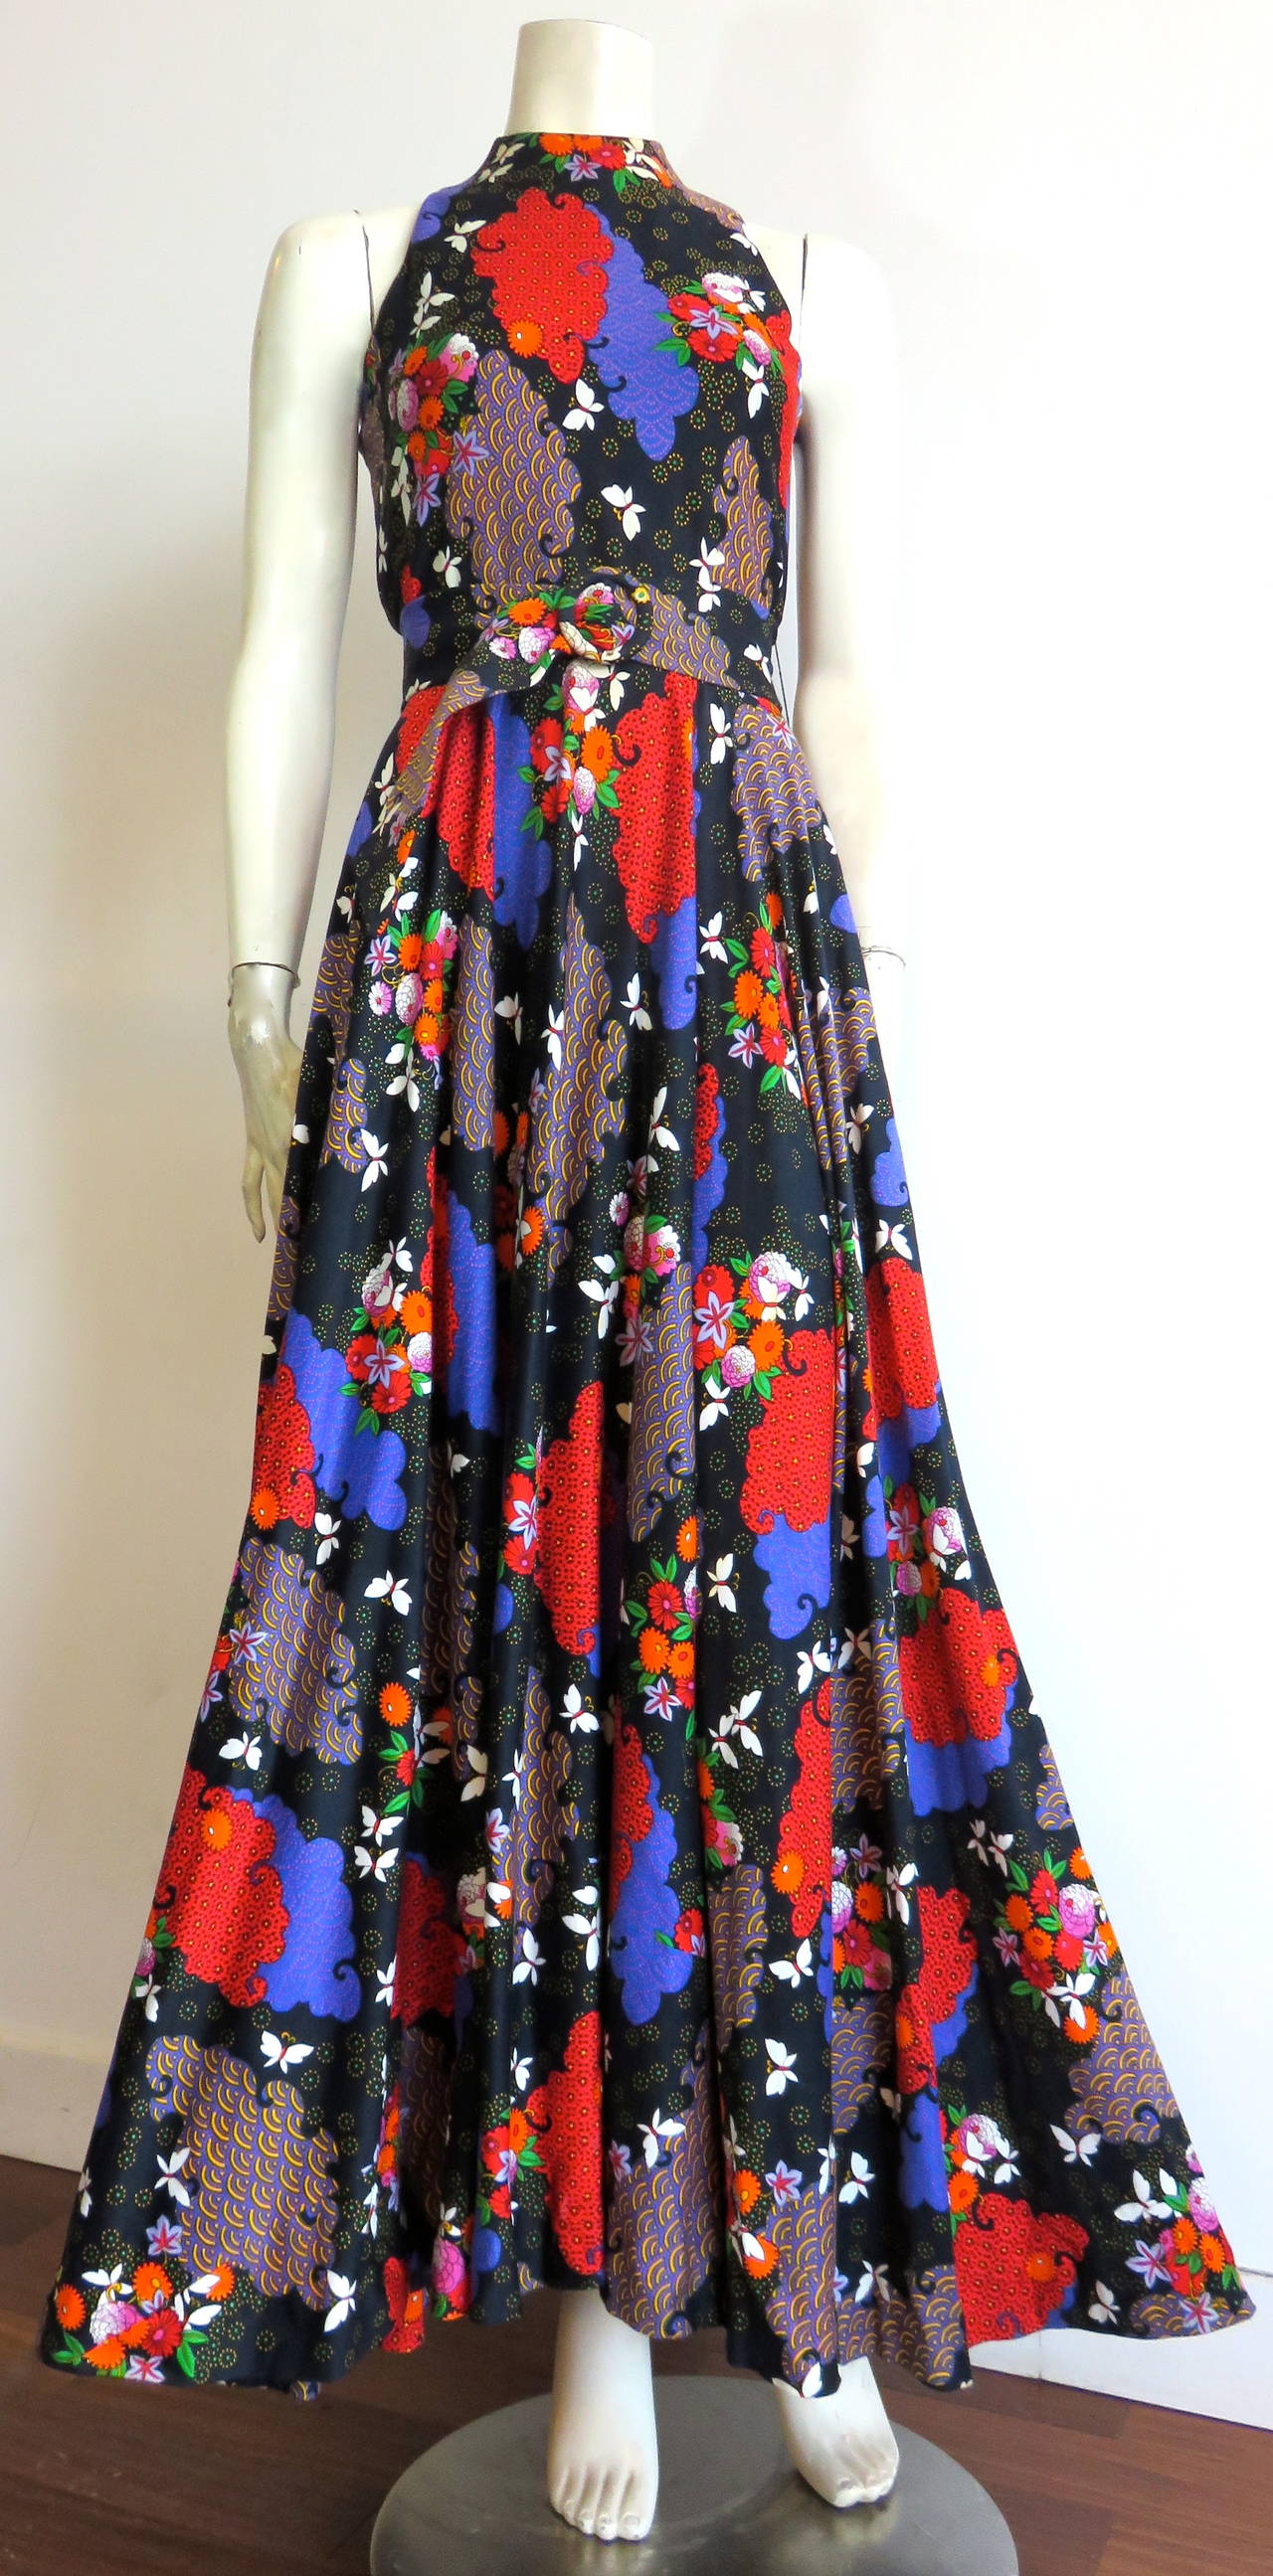 Gorgeous, 1970's, GEOFFREY BEENE BOUTIQUE, floral print dress & belt.

Dark midnight blue, knit jersey base cloth with multi-color, floral, bouquets, white butterflies, and geometric pattern fills.

Adjustable, matching belt with ring slider,